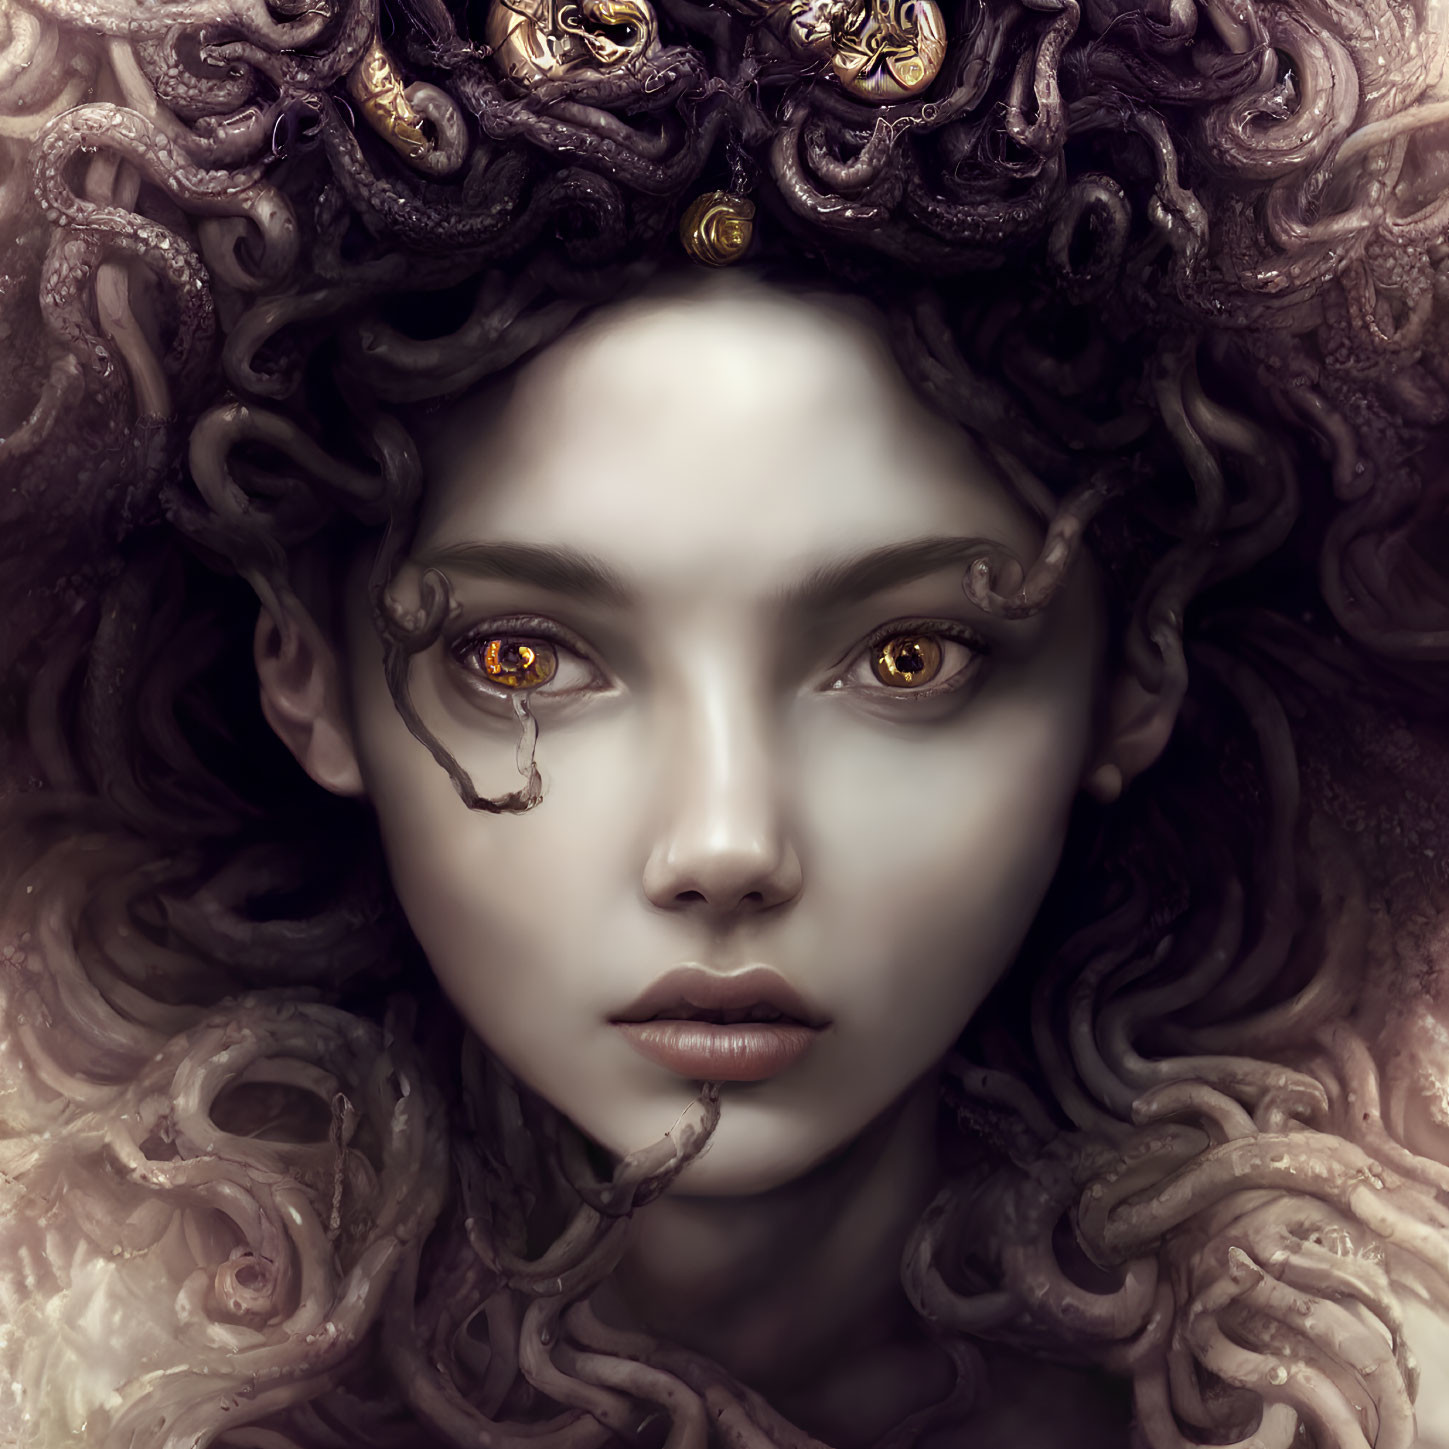 Golden-eyed woman with serpentine hair and gold ornaments: A mystical, Medusa-like illustration